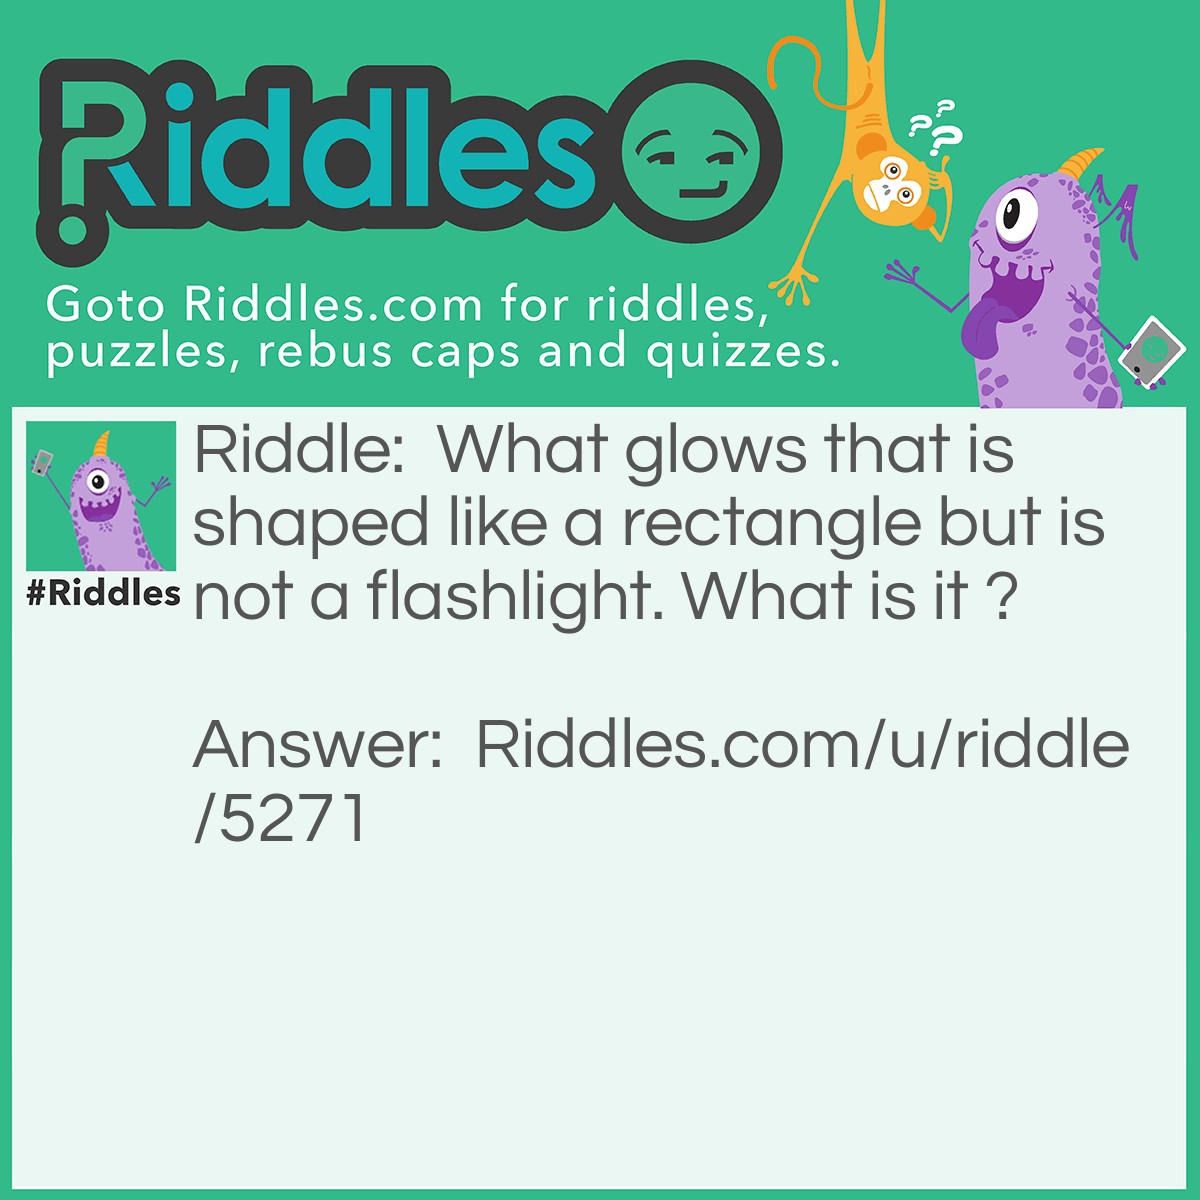 Riddle: What glows that is shaped like a rectangle but is not a flashlight. What is it ? Answer: Your phone.